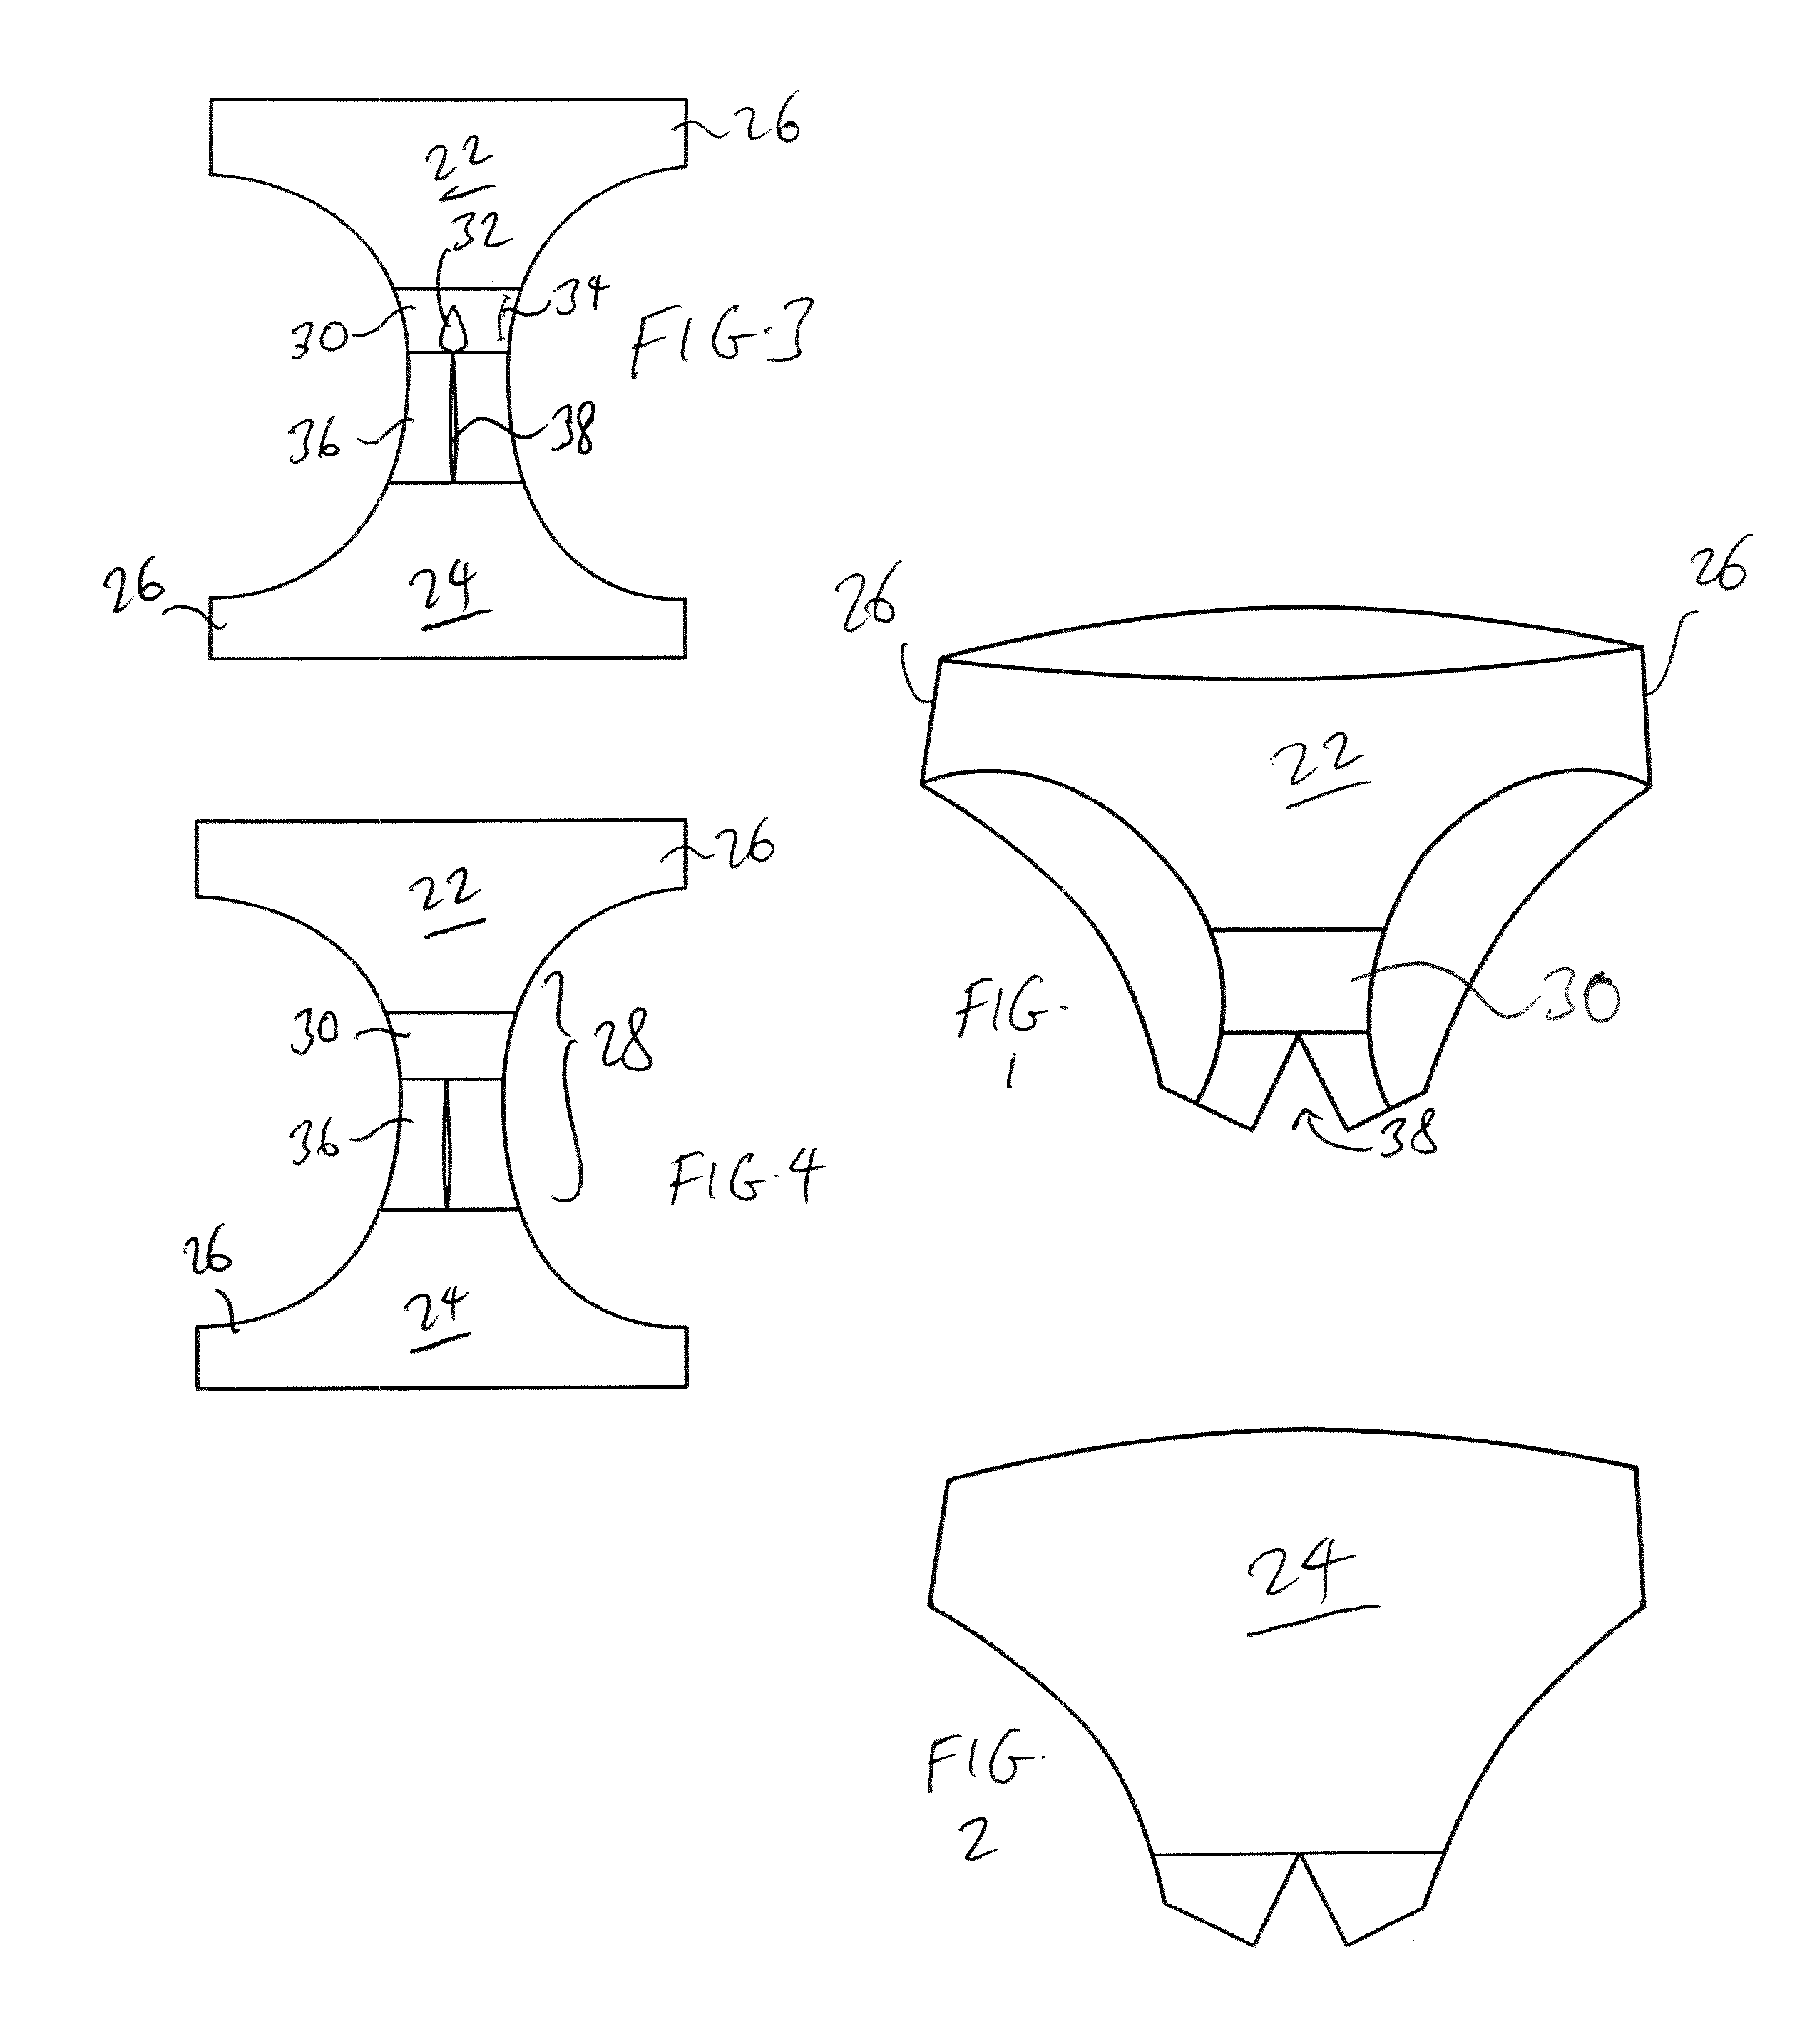 Underwear Assembly Incorporating a Vibrator